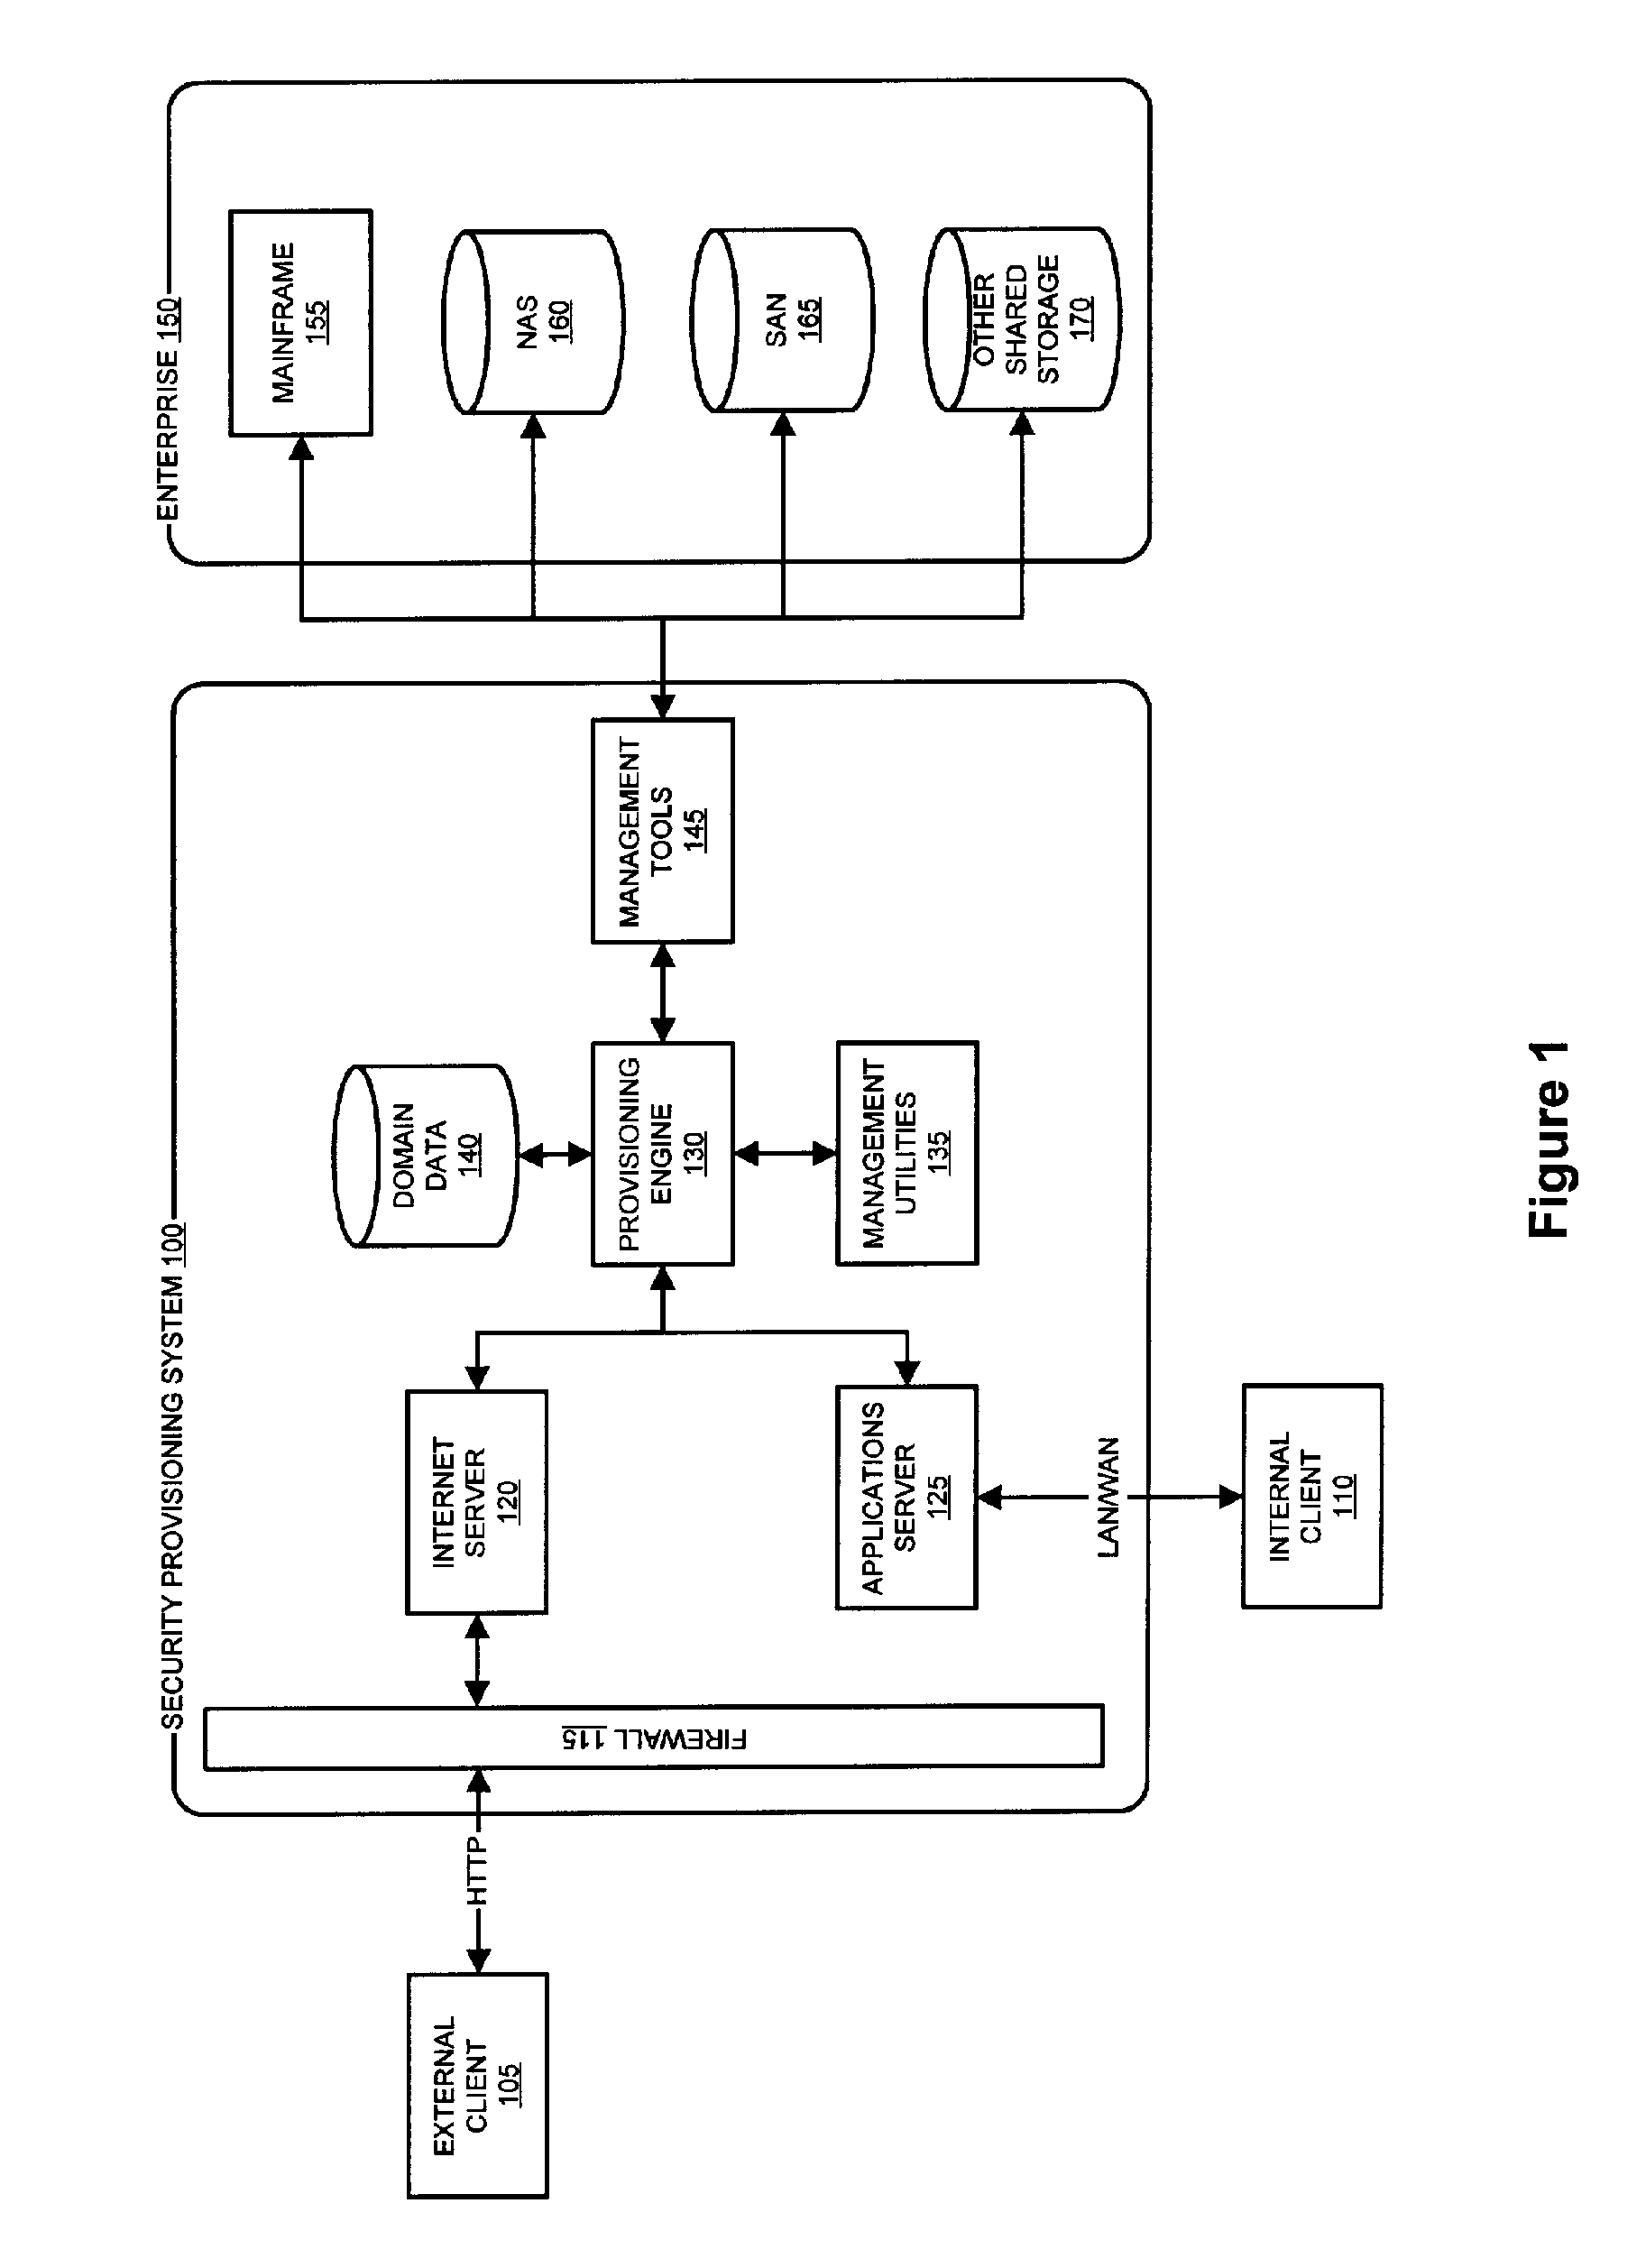 System and method for dynamic security provisioning of data resources